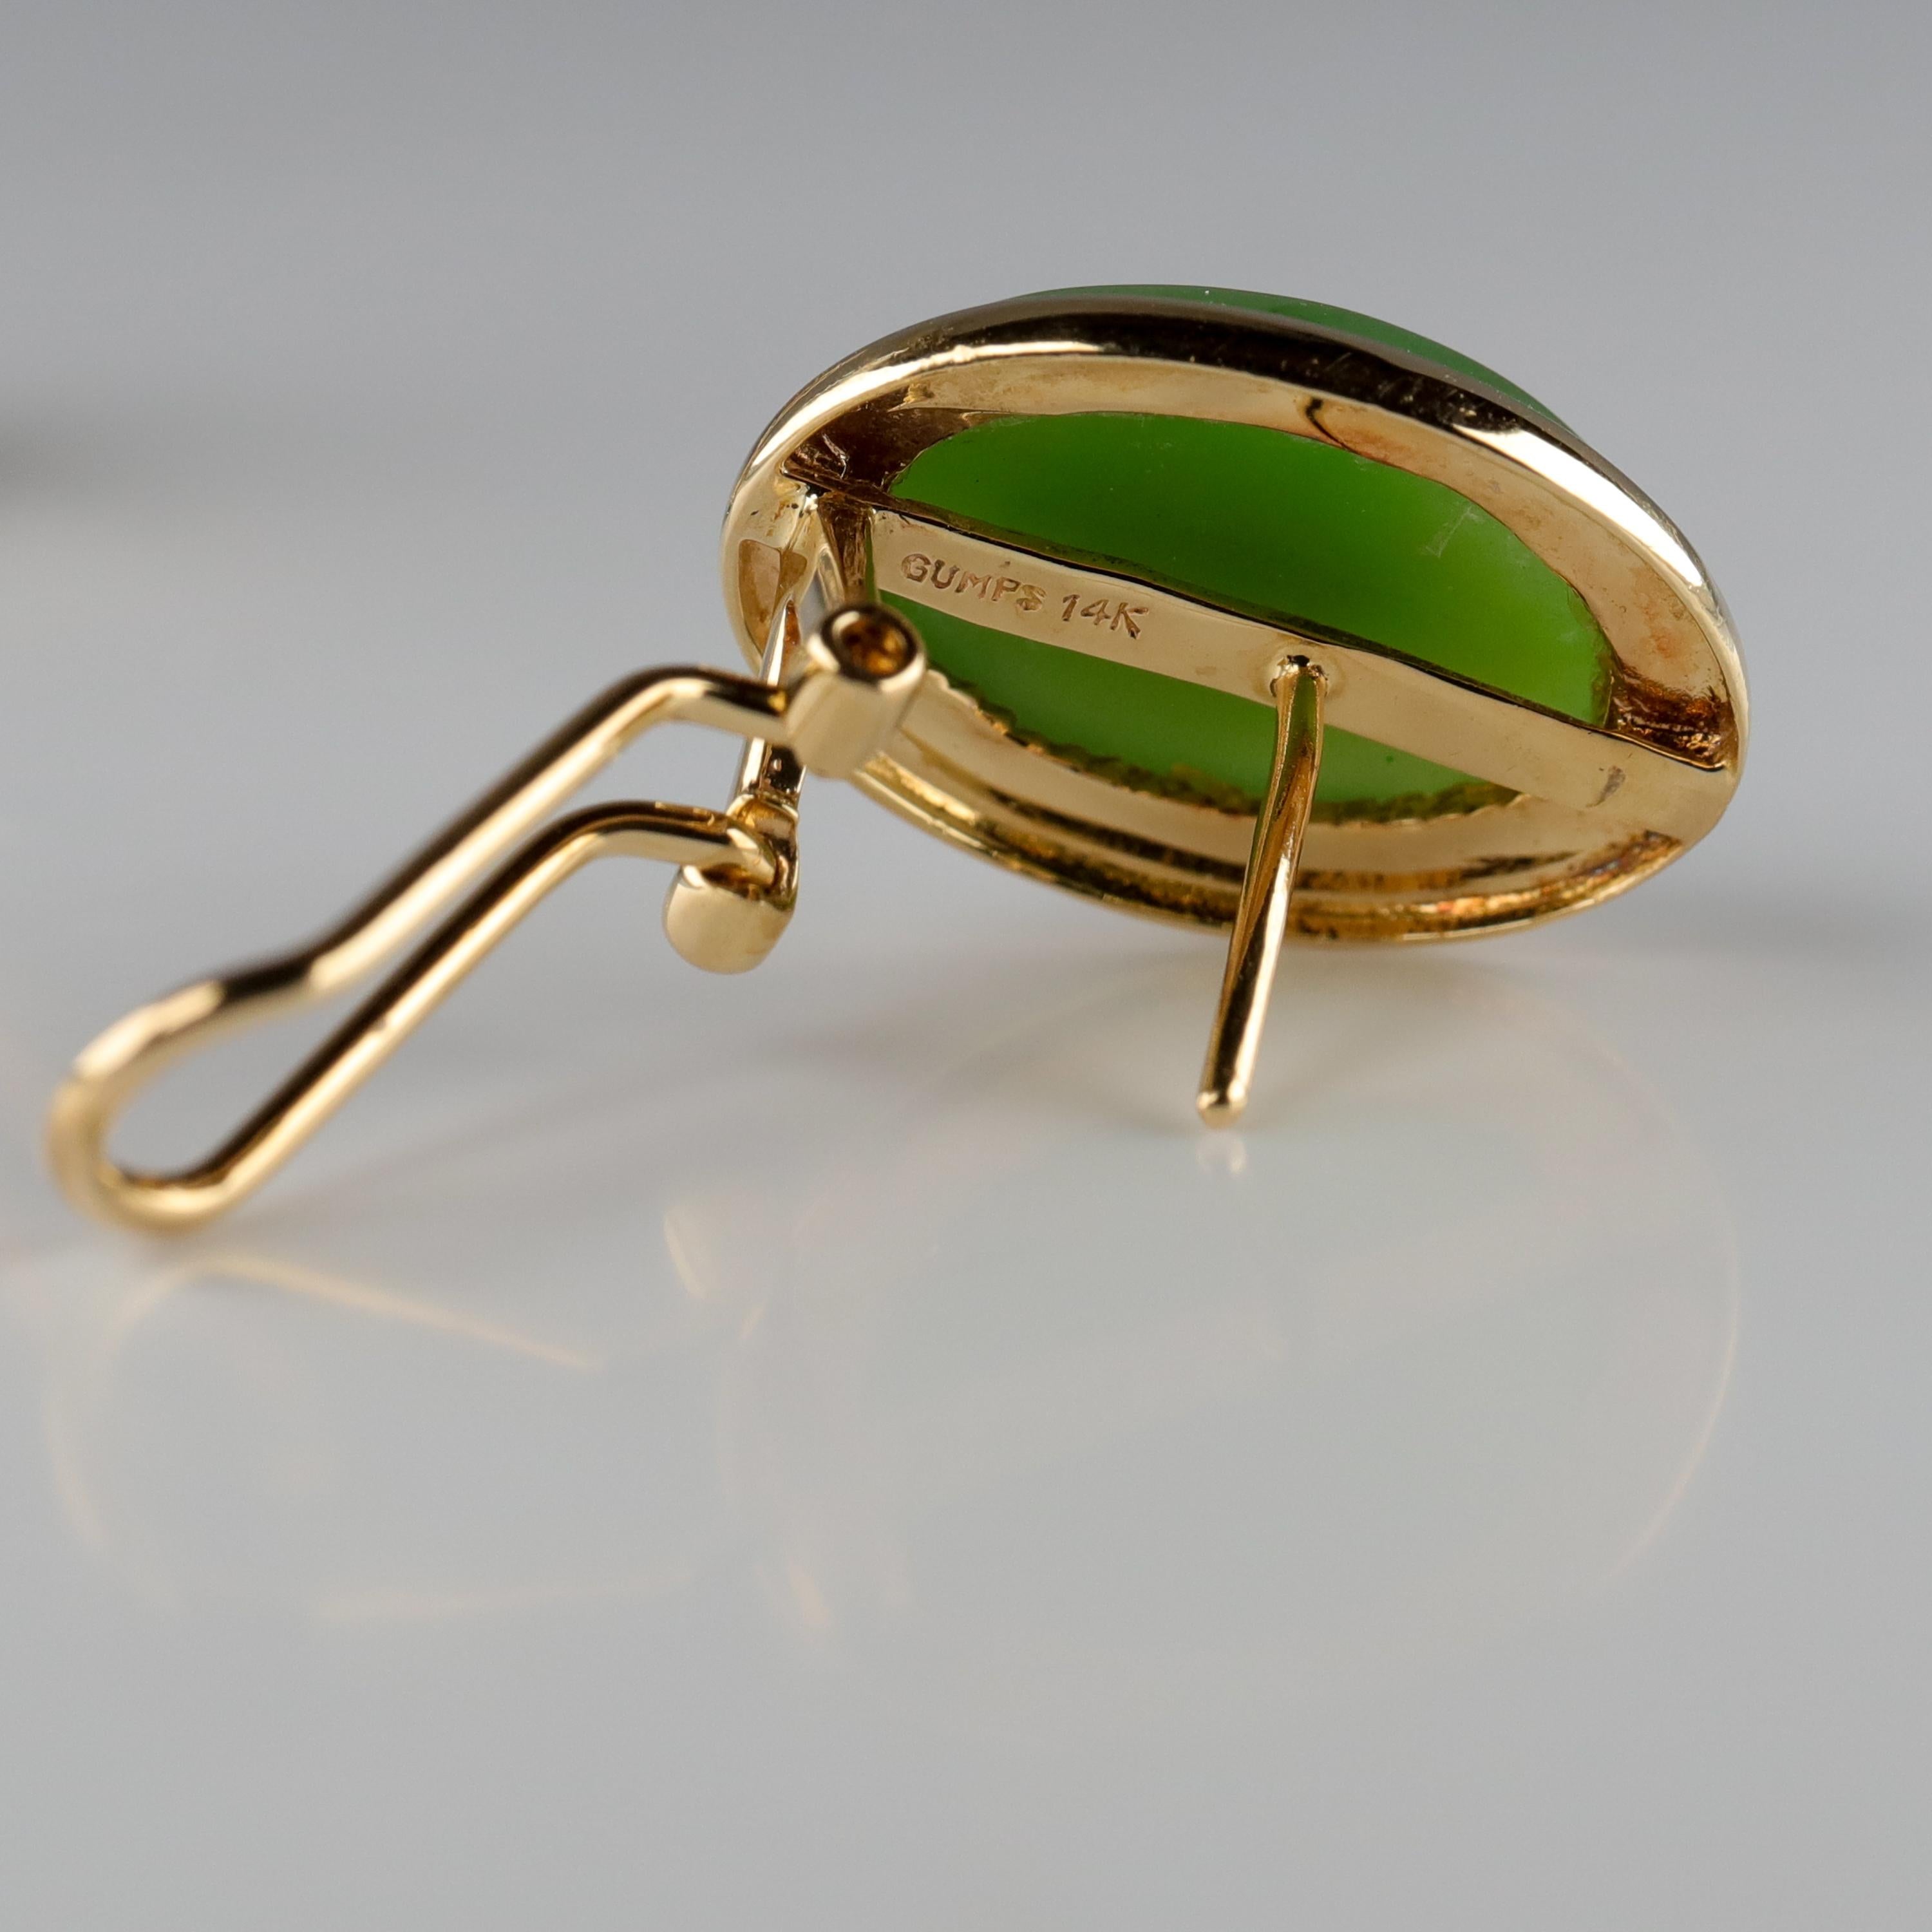 Contemporary Gump's Jade Earrings in Gold, circa 1990s